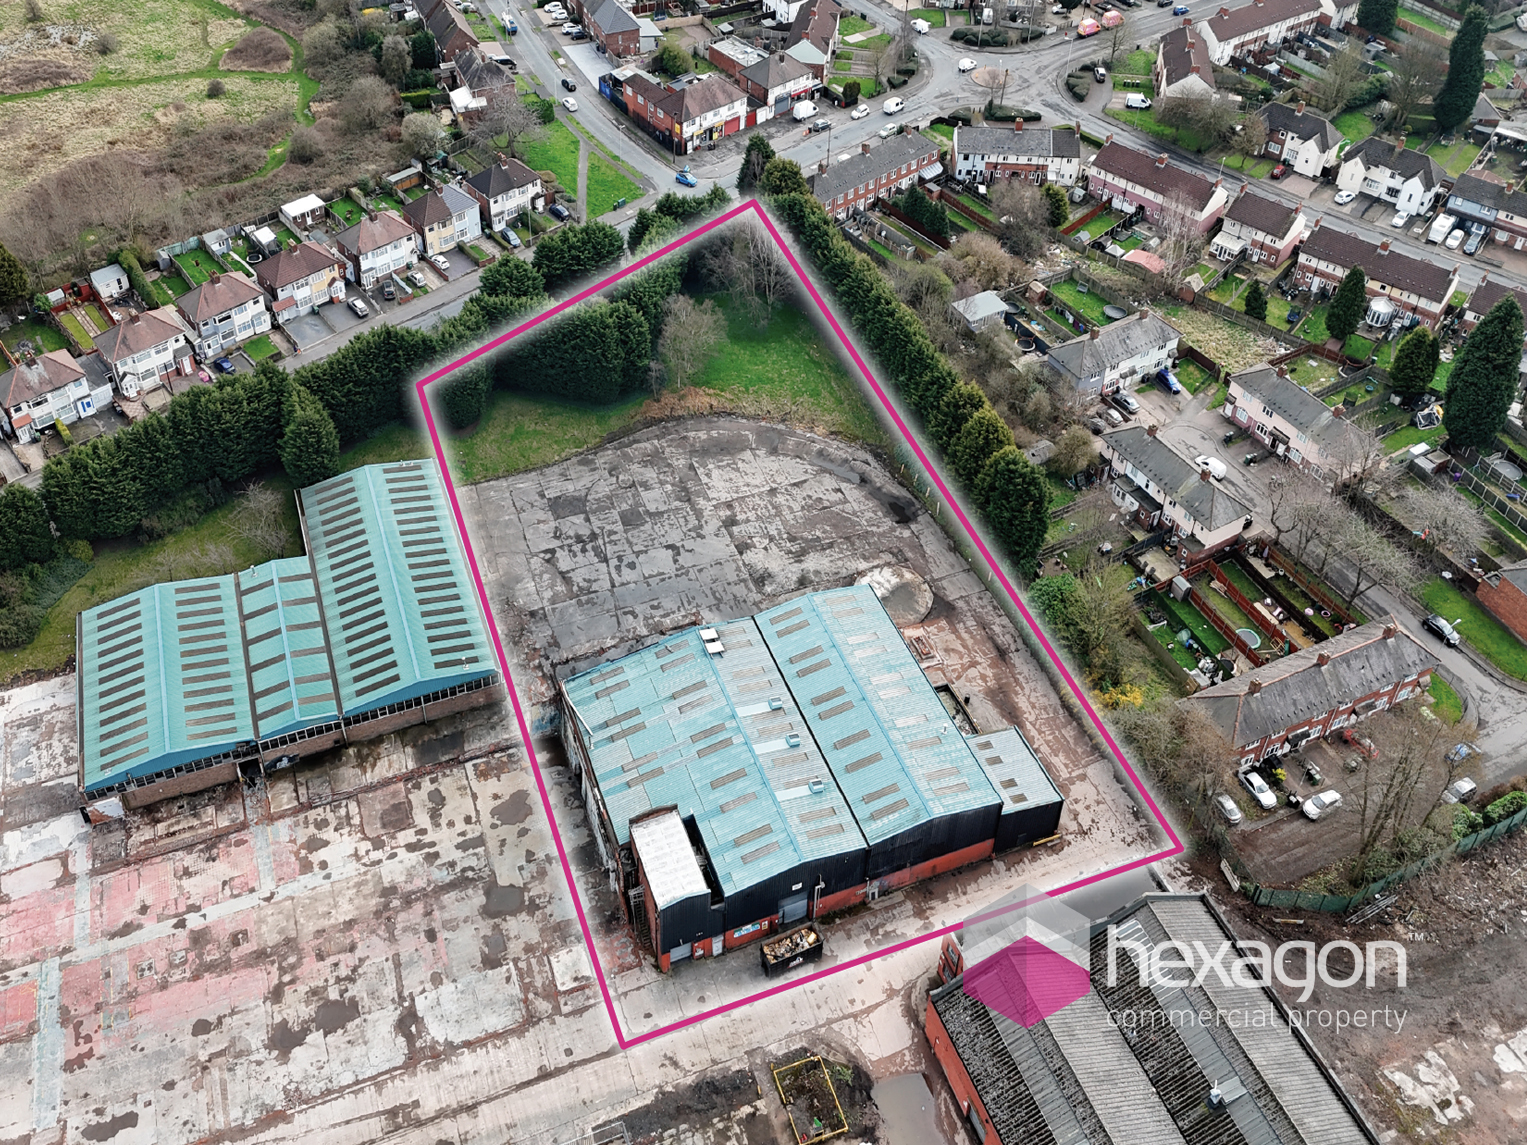 Light Industrial for rent in Wolverhampton. From Hexagon Commercial Property